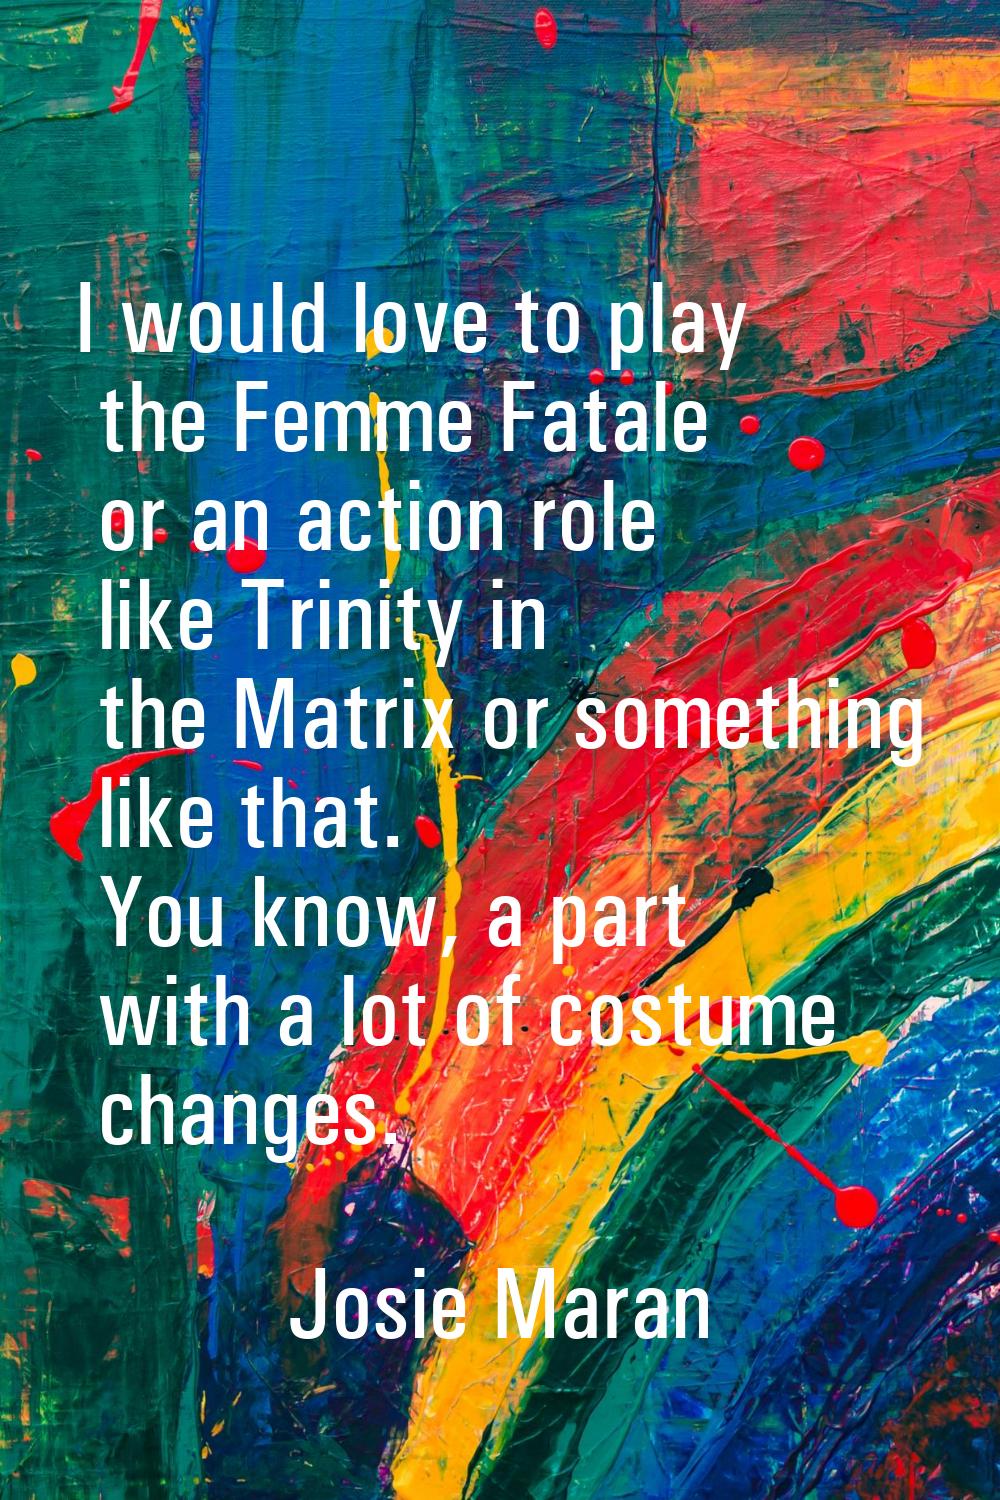 I would love to play the Femme Fatale or an action role like Trinity in the Matrix or something lik